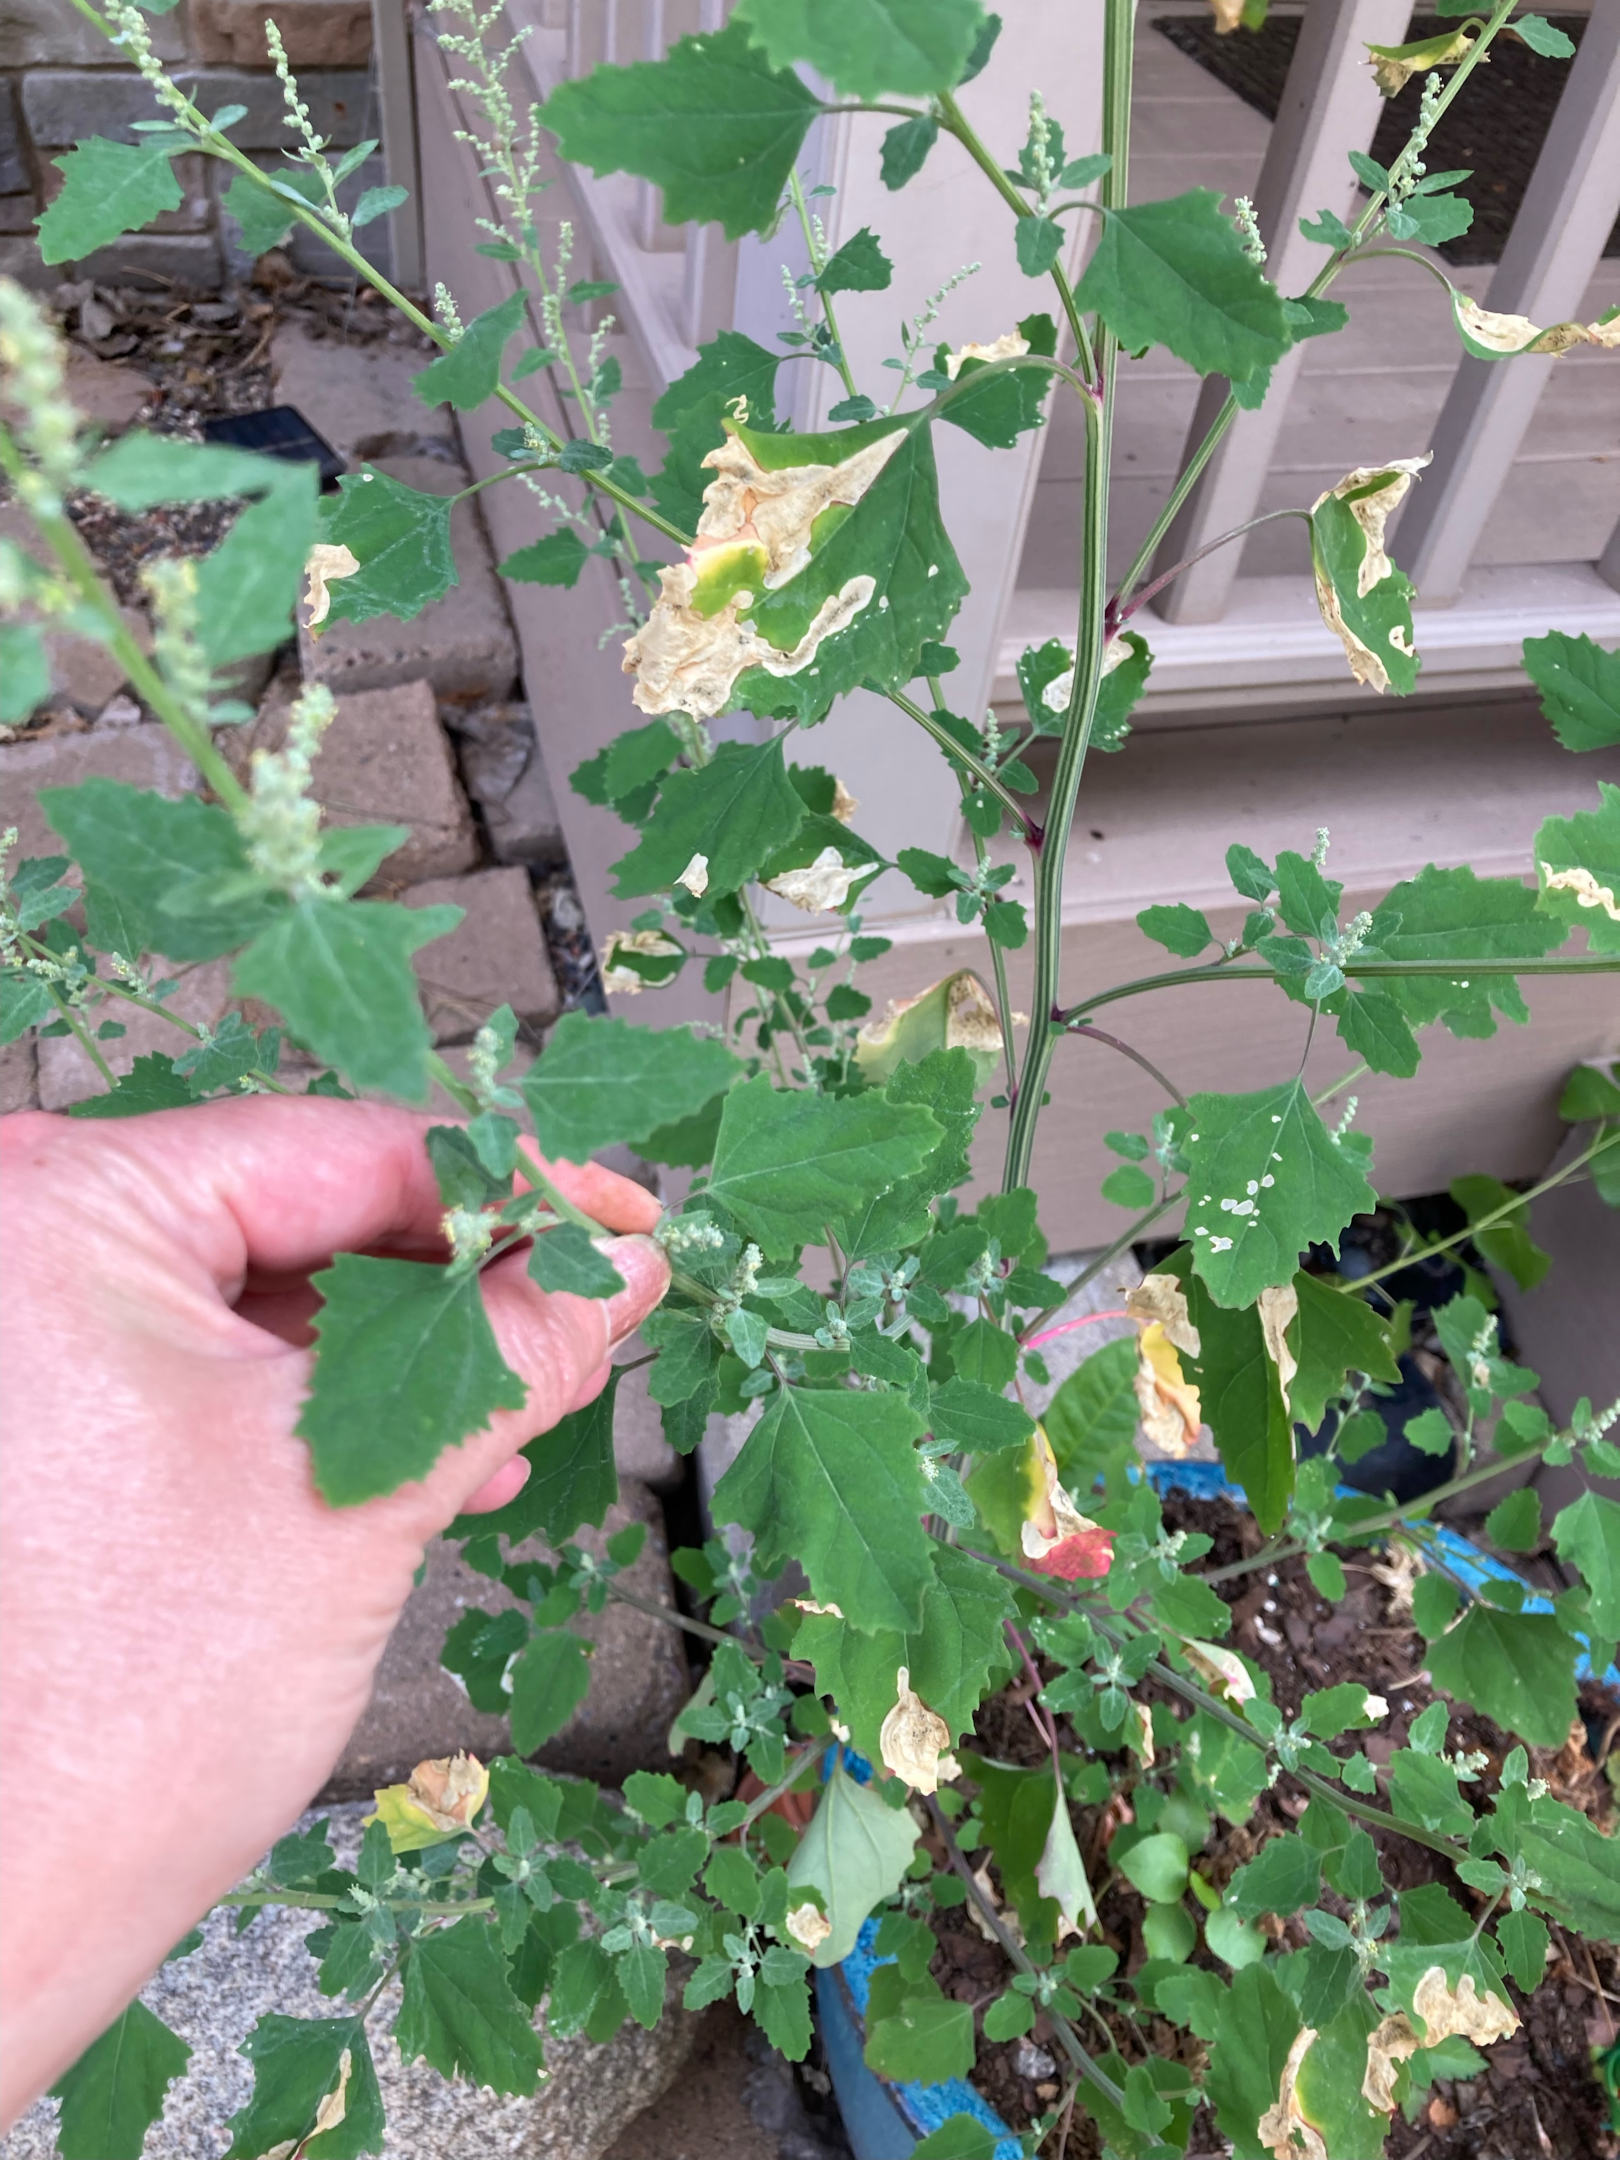 An image showing hands harvesting fresh lambs quarters from a garden bed.